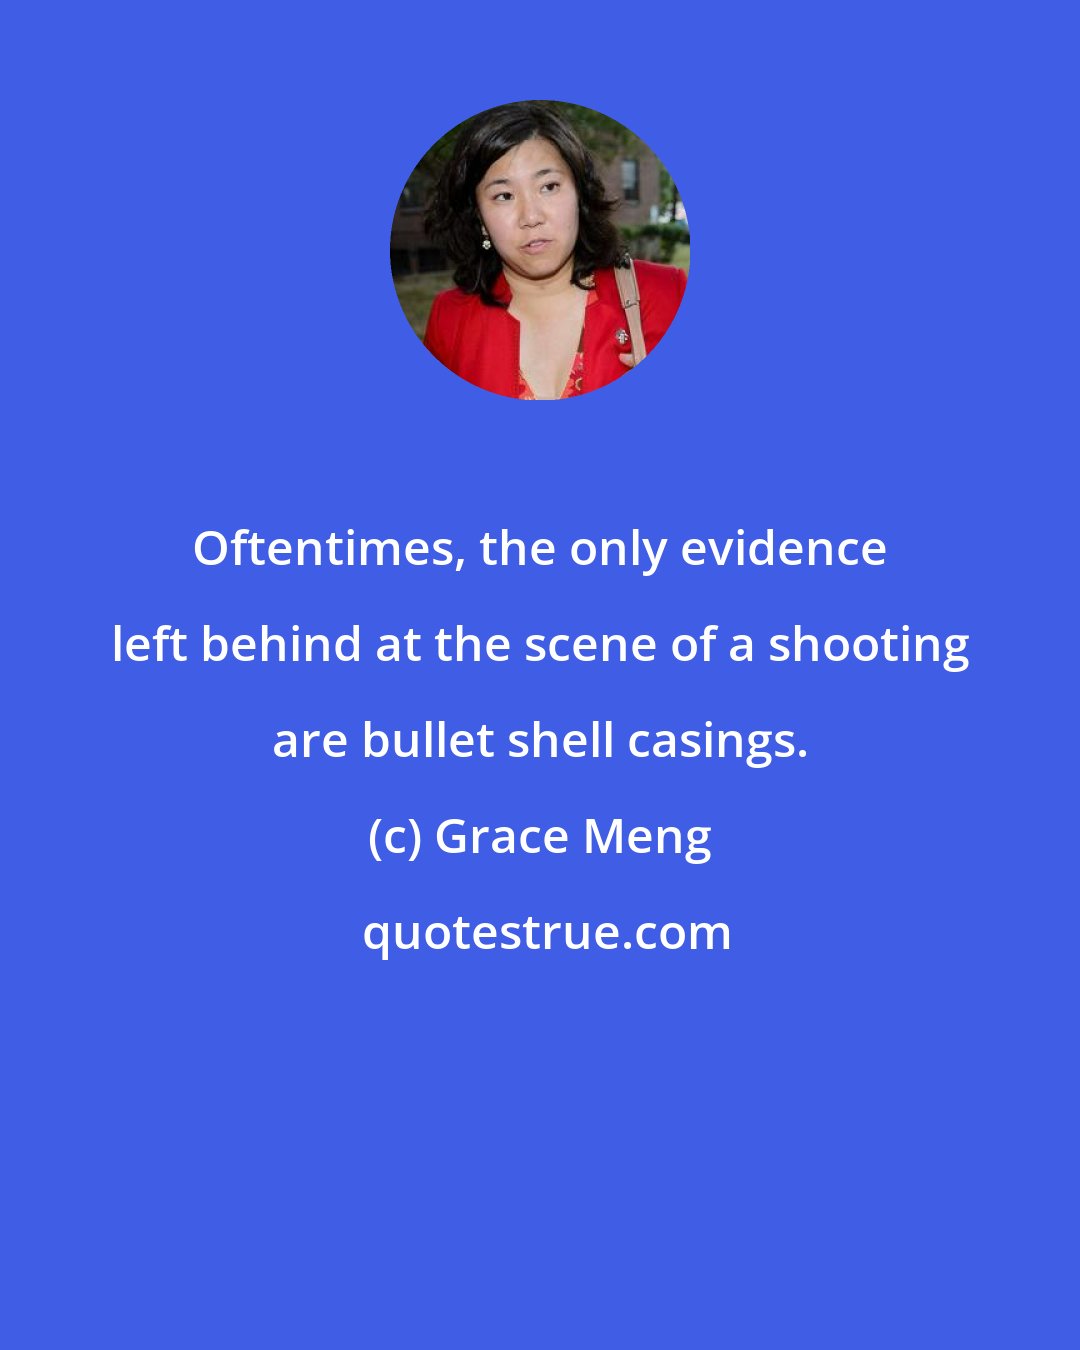 Grace Meng: Oftentimes, the only evidence left behind at the scene of a shooting are bullet shell casings.